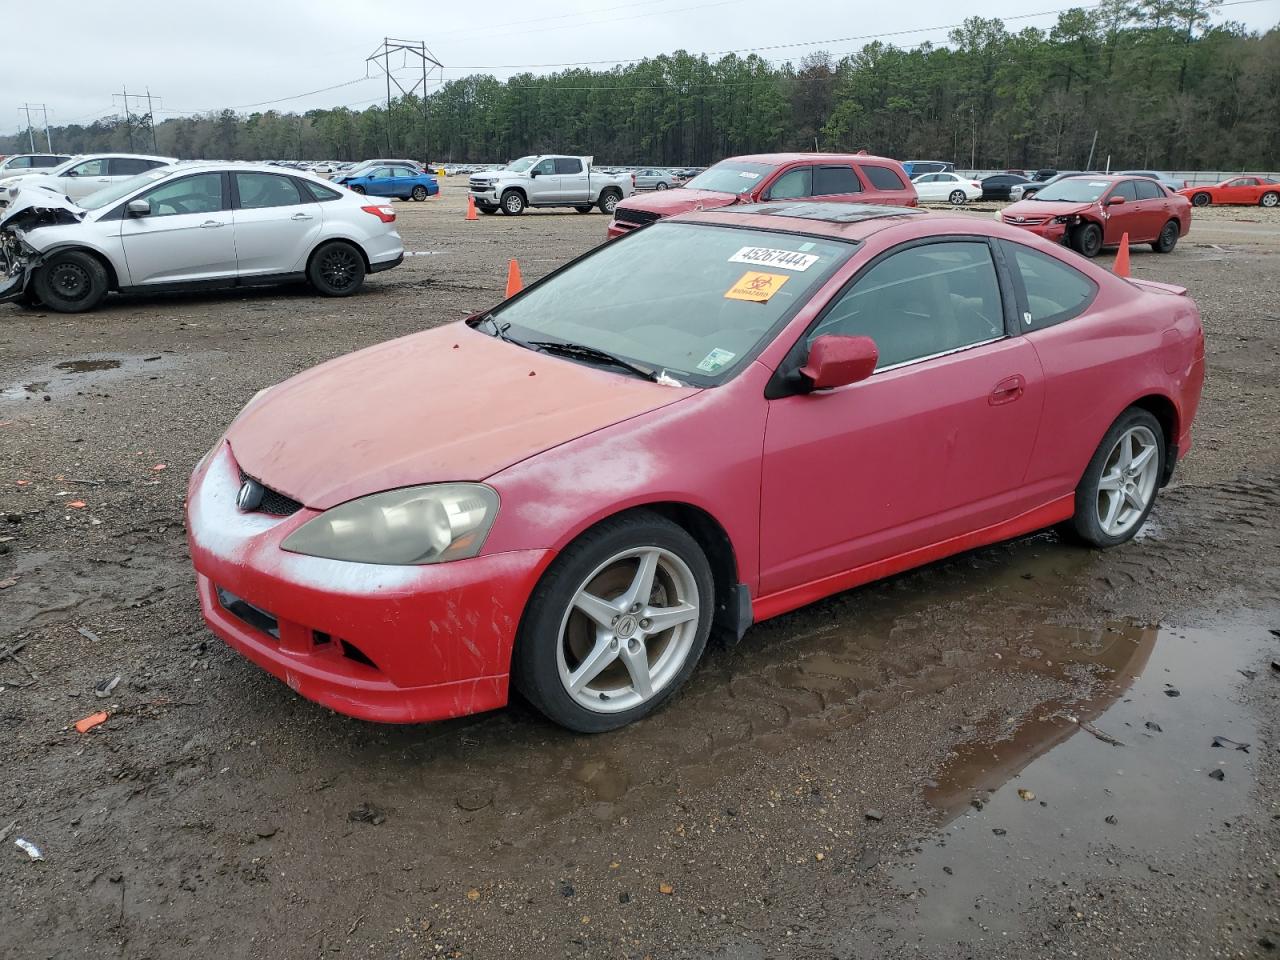 vin: JH4DC53056S012061 JH4DC53056S012061 2006 acura rsx 2000 for Sale in 70739 5532, La - Baton Rouge, Greenwell Springs, USA